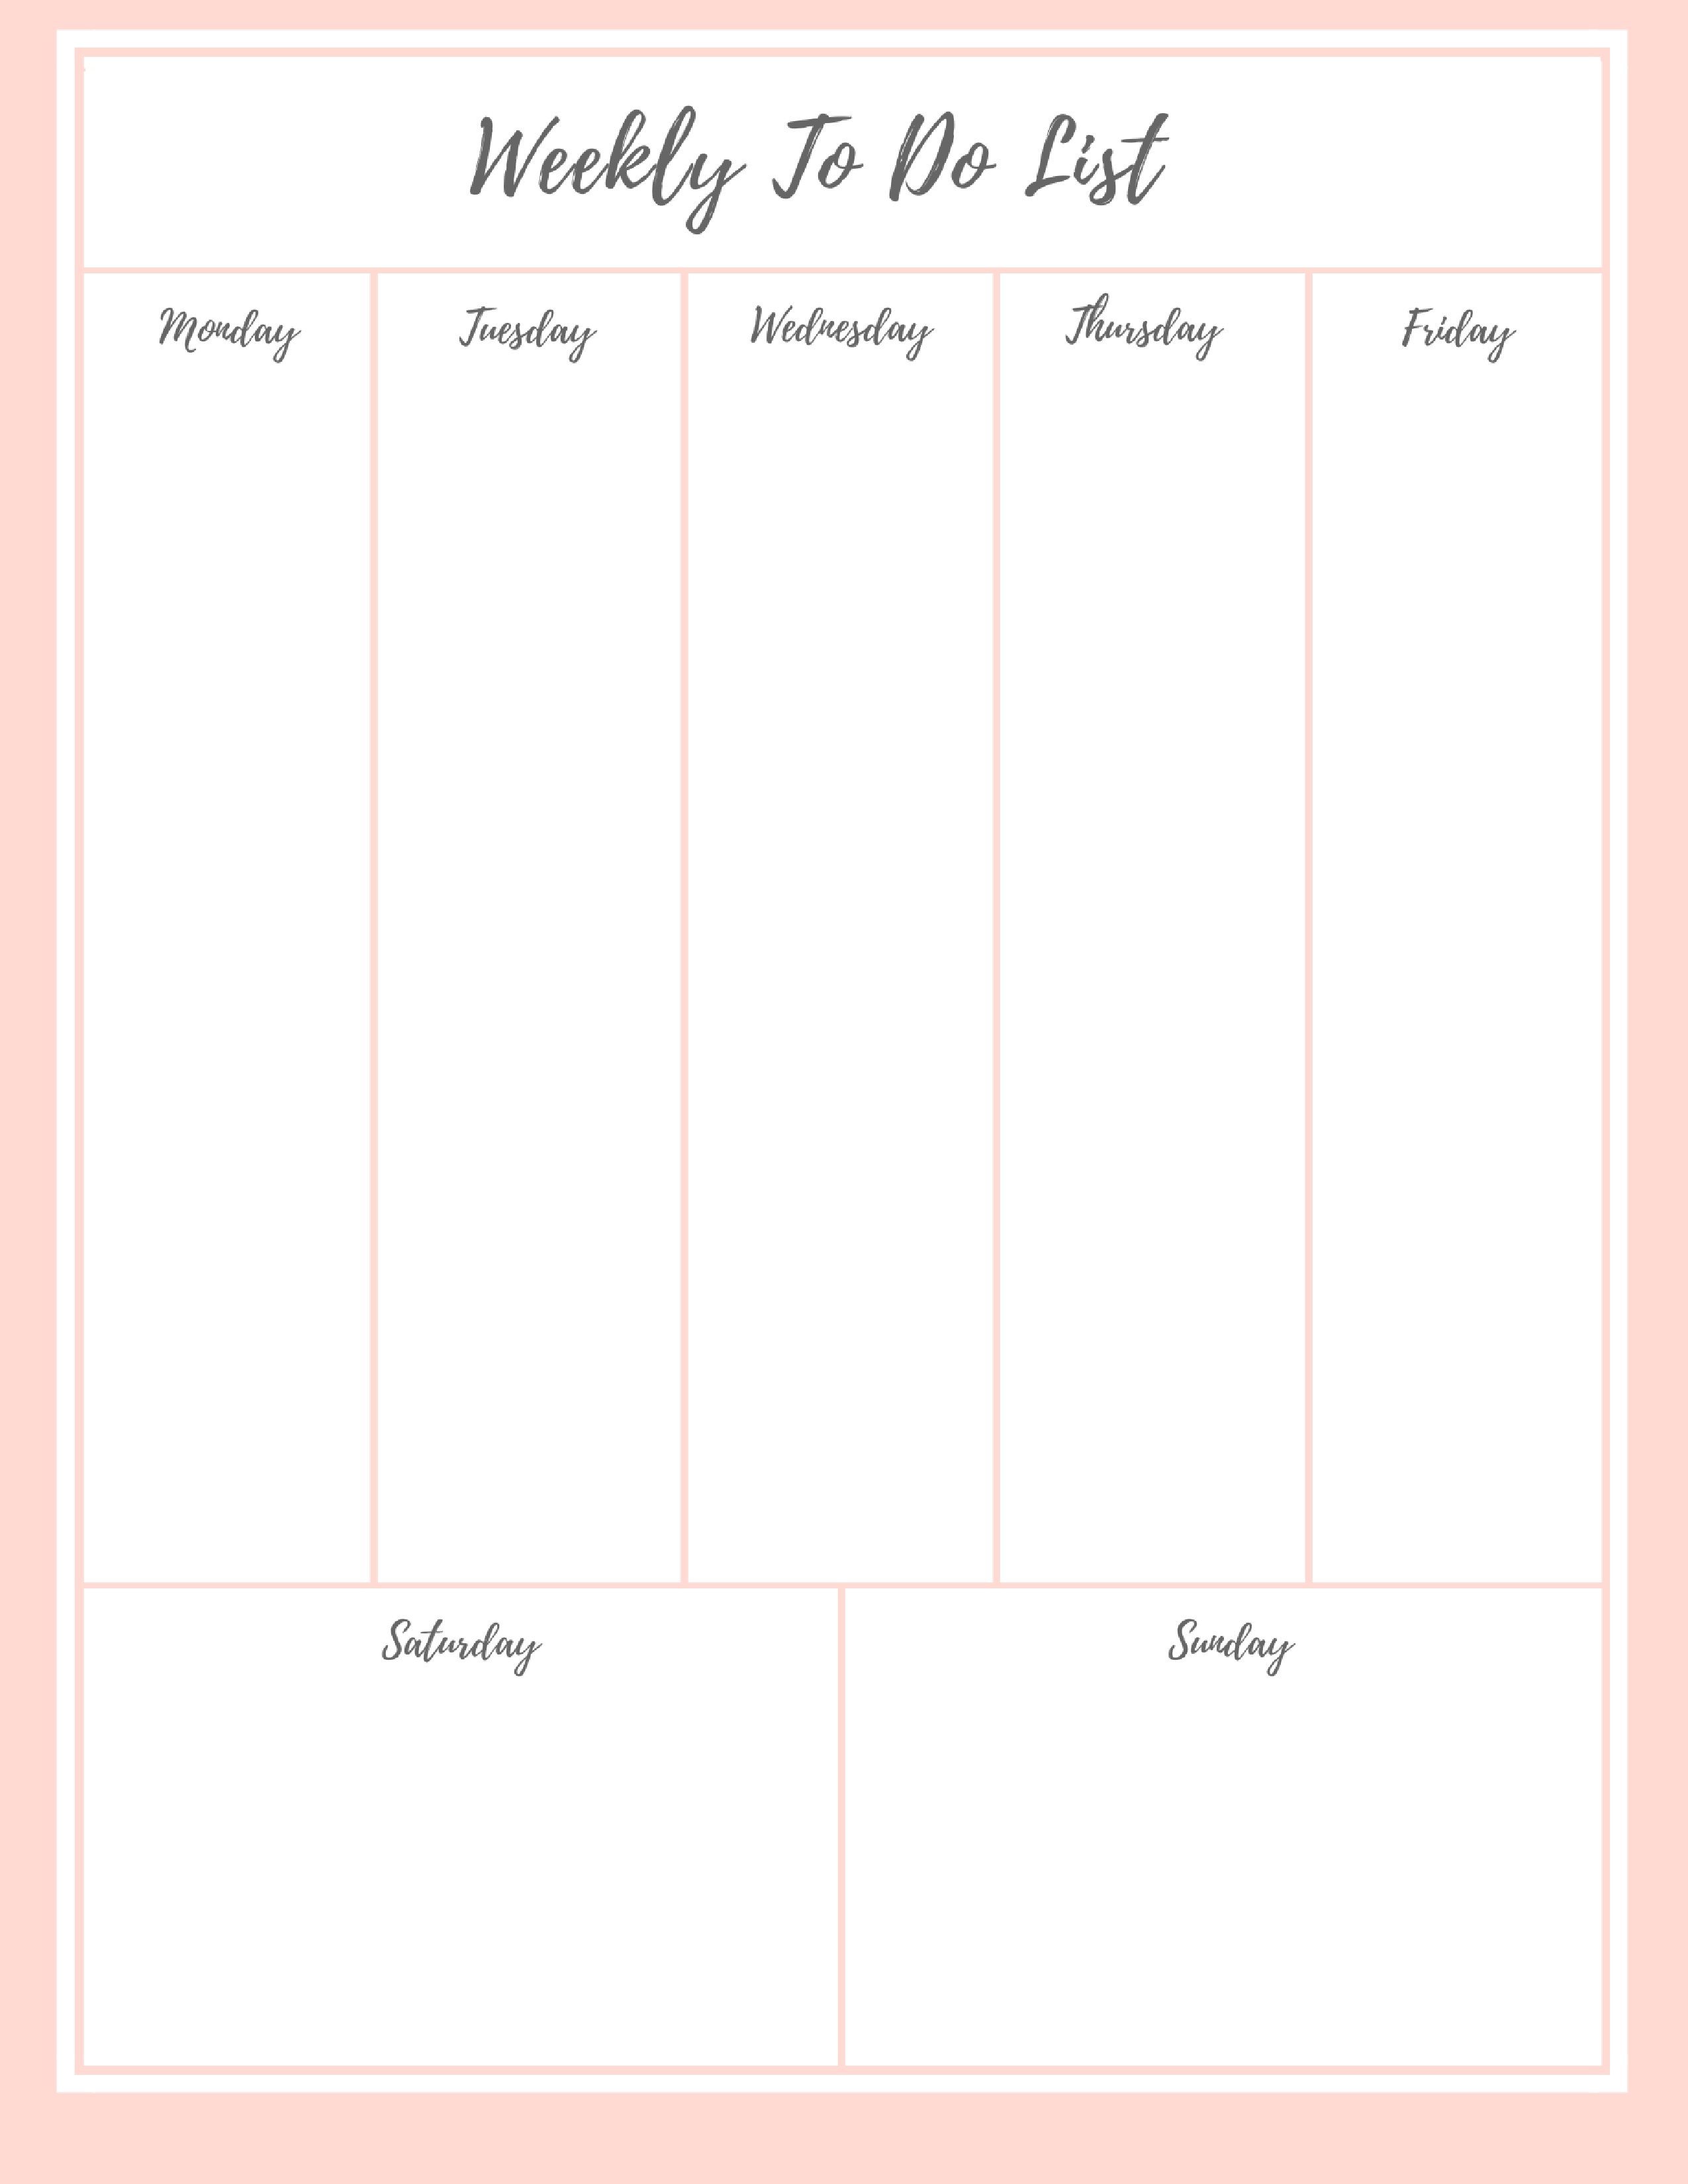 to do list, to do list printable, pretty to do list, pretty to do list printable, pretty to do list free printable, cute to do list, cute to do list diy, cute to do list printable, to do list template, to do list pdf, to do list bullet journal, a to do list for life, to do list calendar, weekly to do list, weekly to do list printable, weekly to do list printable free, weekly to do, weekly to do printable, to do list download, weekly to do list pdf, weekly planner and to do list